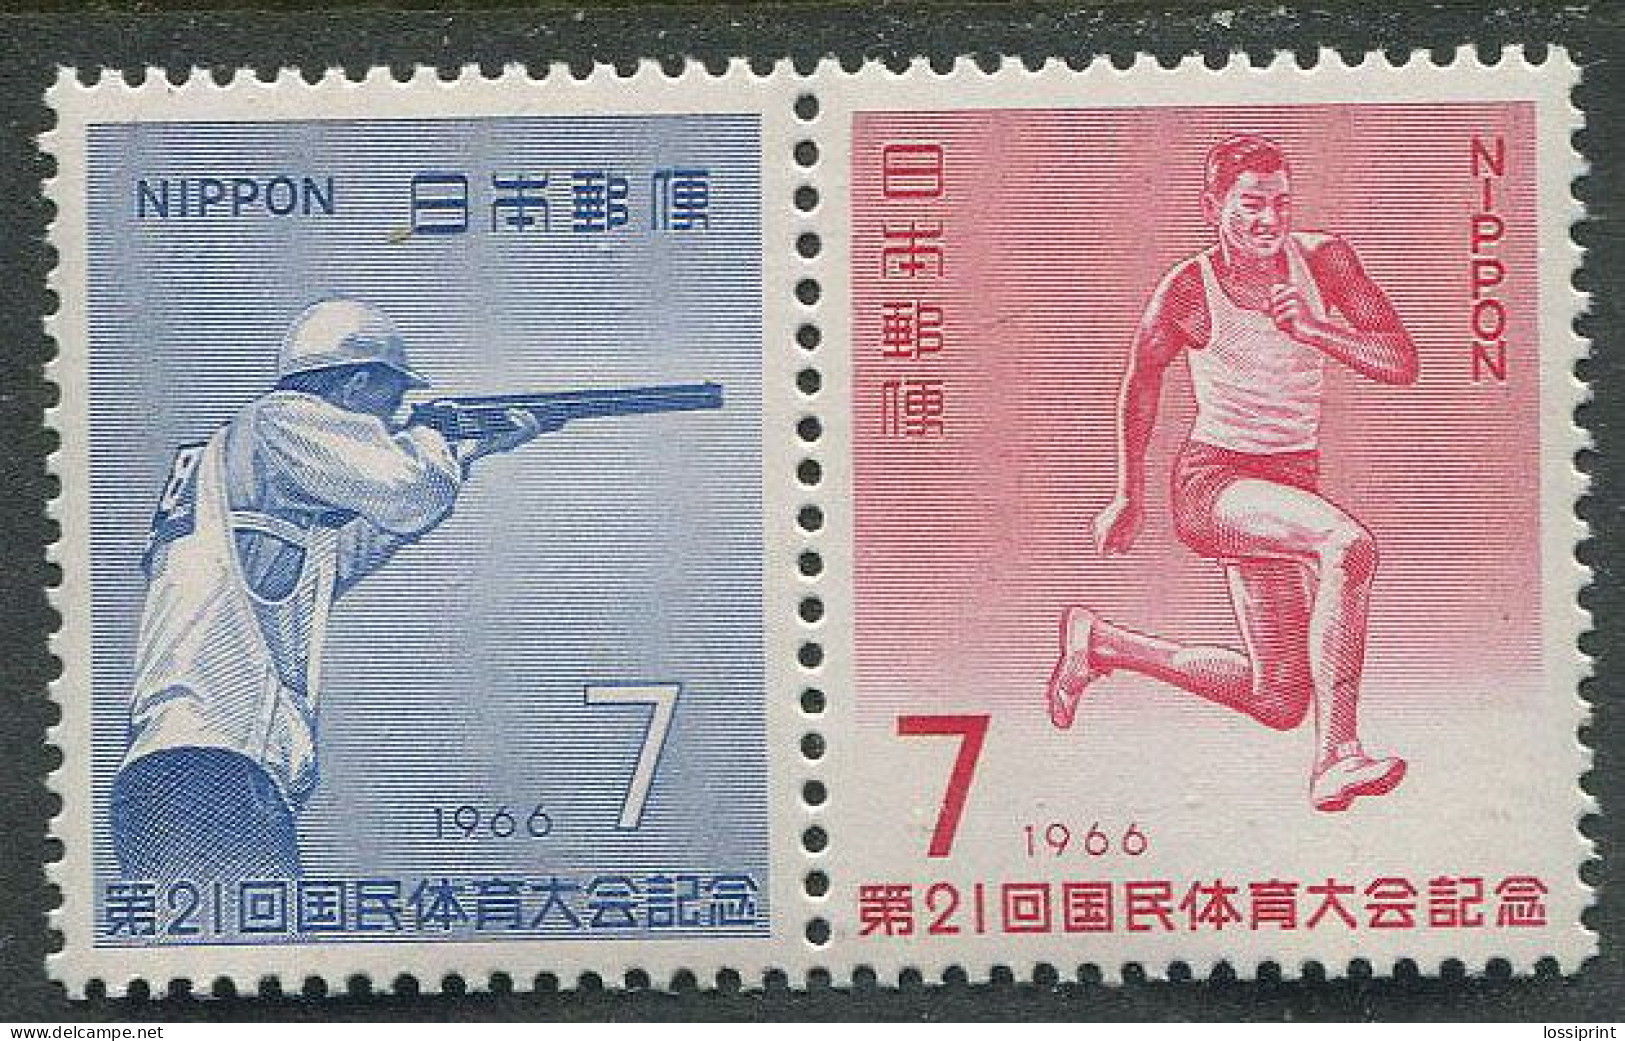 Japan:Unused Stamps Shooting And Running, 1966, MNH - Shooting (Weapons)